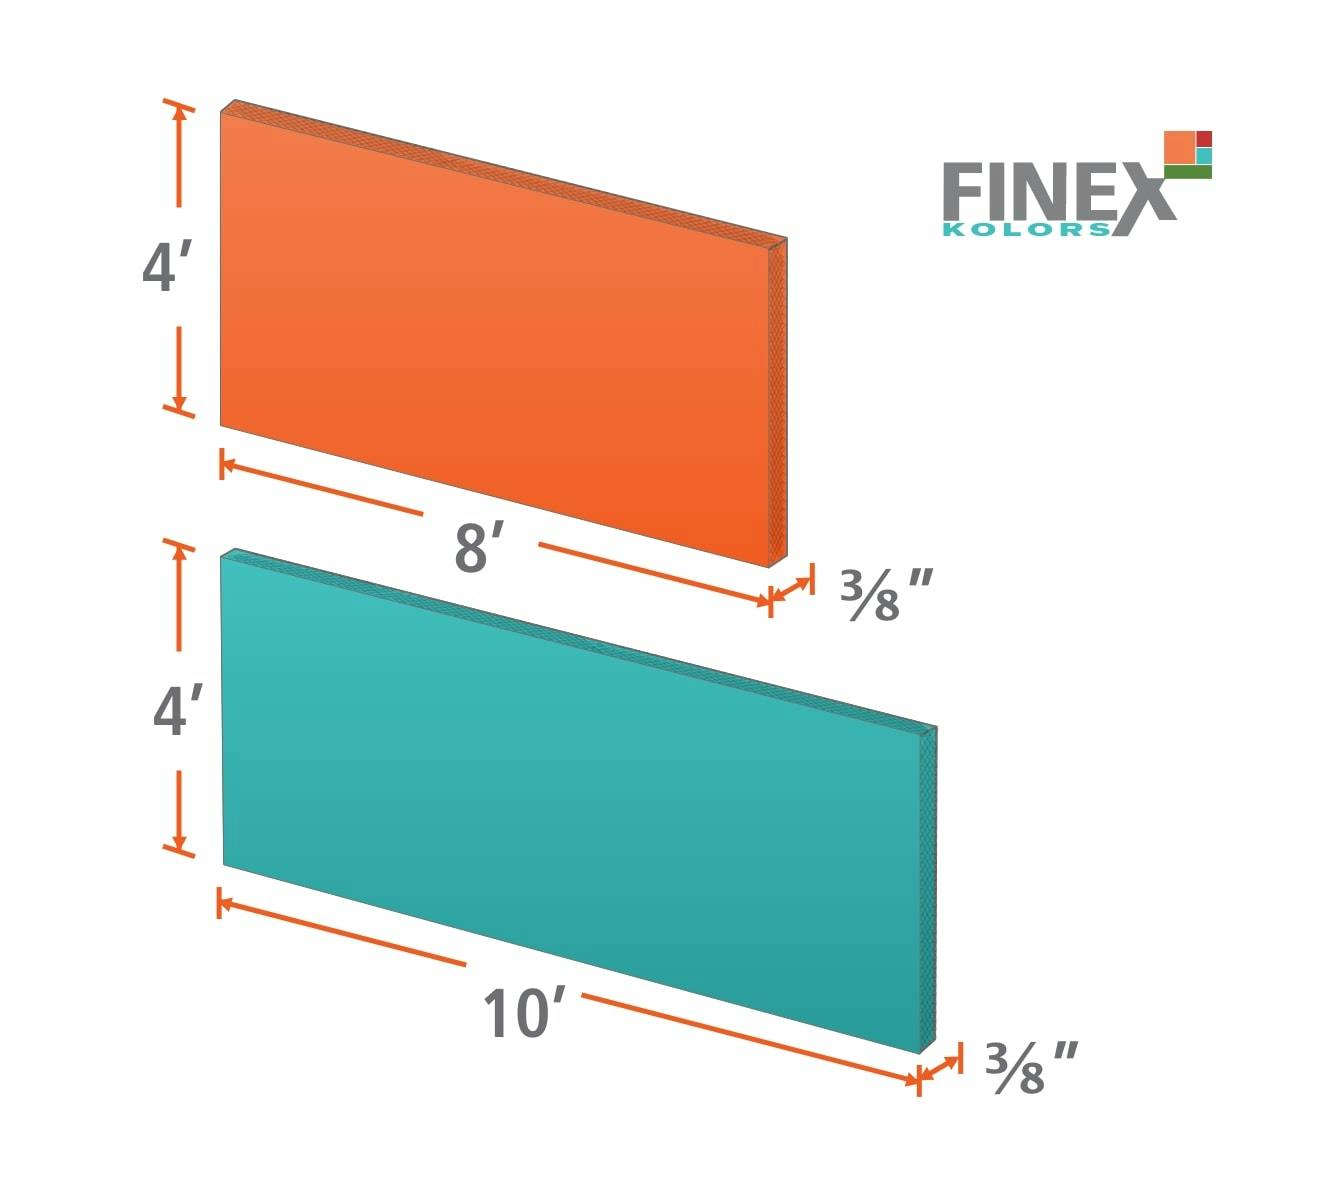 Diagram showing the dimensions of FINEX KOLORS fiber cement facade panels, available in sizes 4' x 8' (1.22 m x 2.44 m) and 4' x 10' (1.22 m x 3.05 m), with a thickness of 3/8" (10 mm)